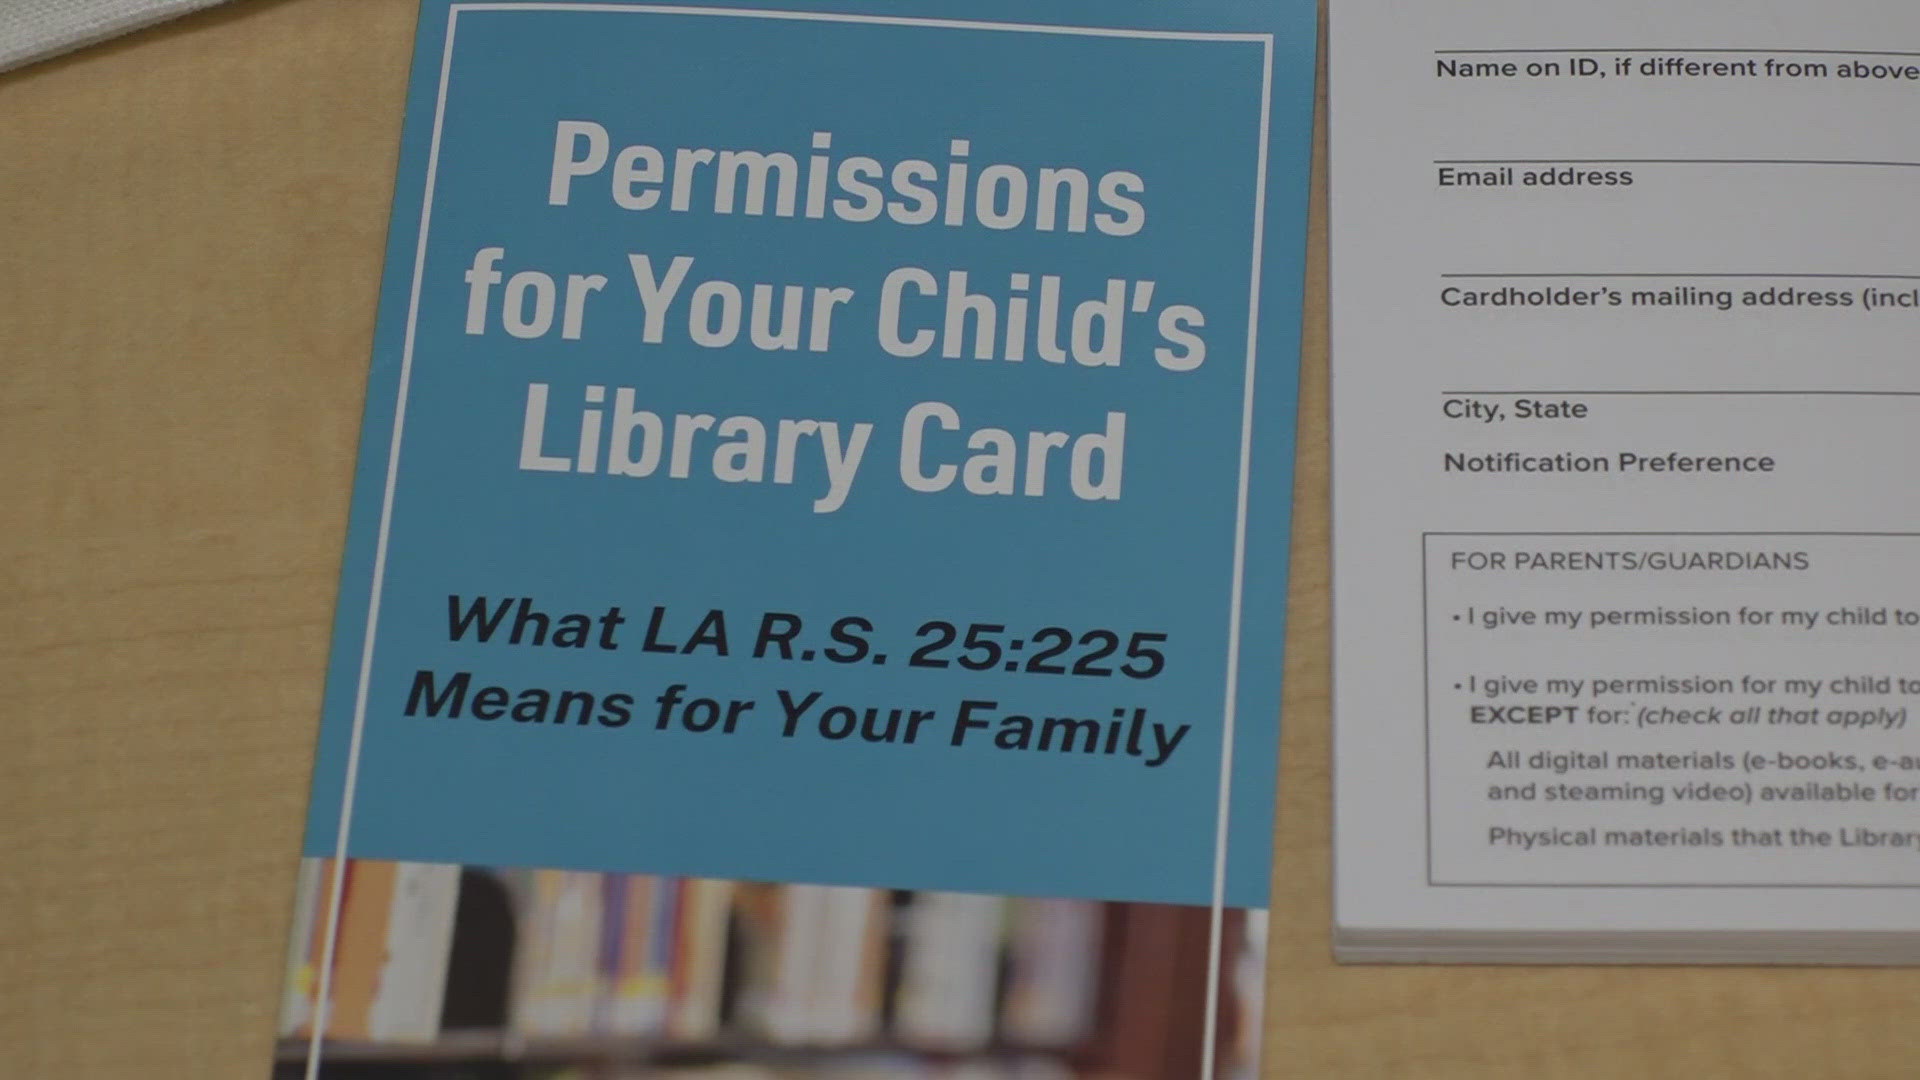 In less than a month, a new state statute will go into effect impacting what Louisiana minors can check out.